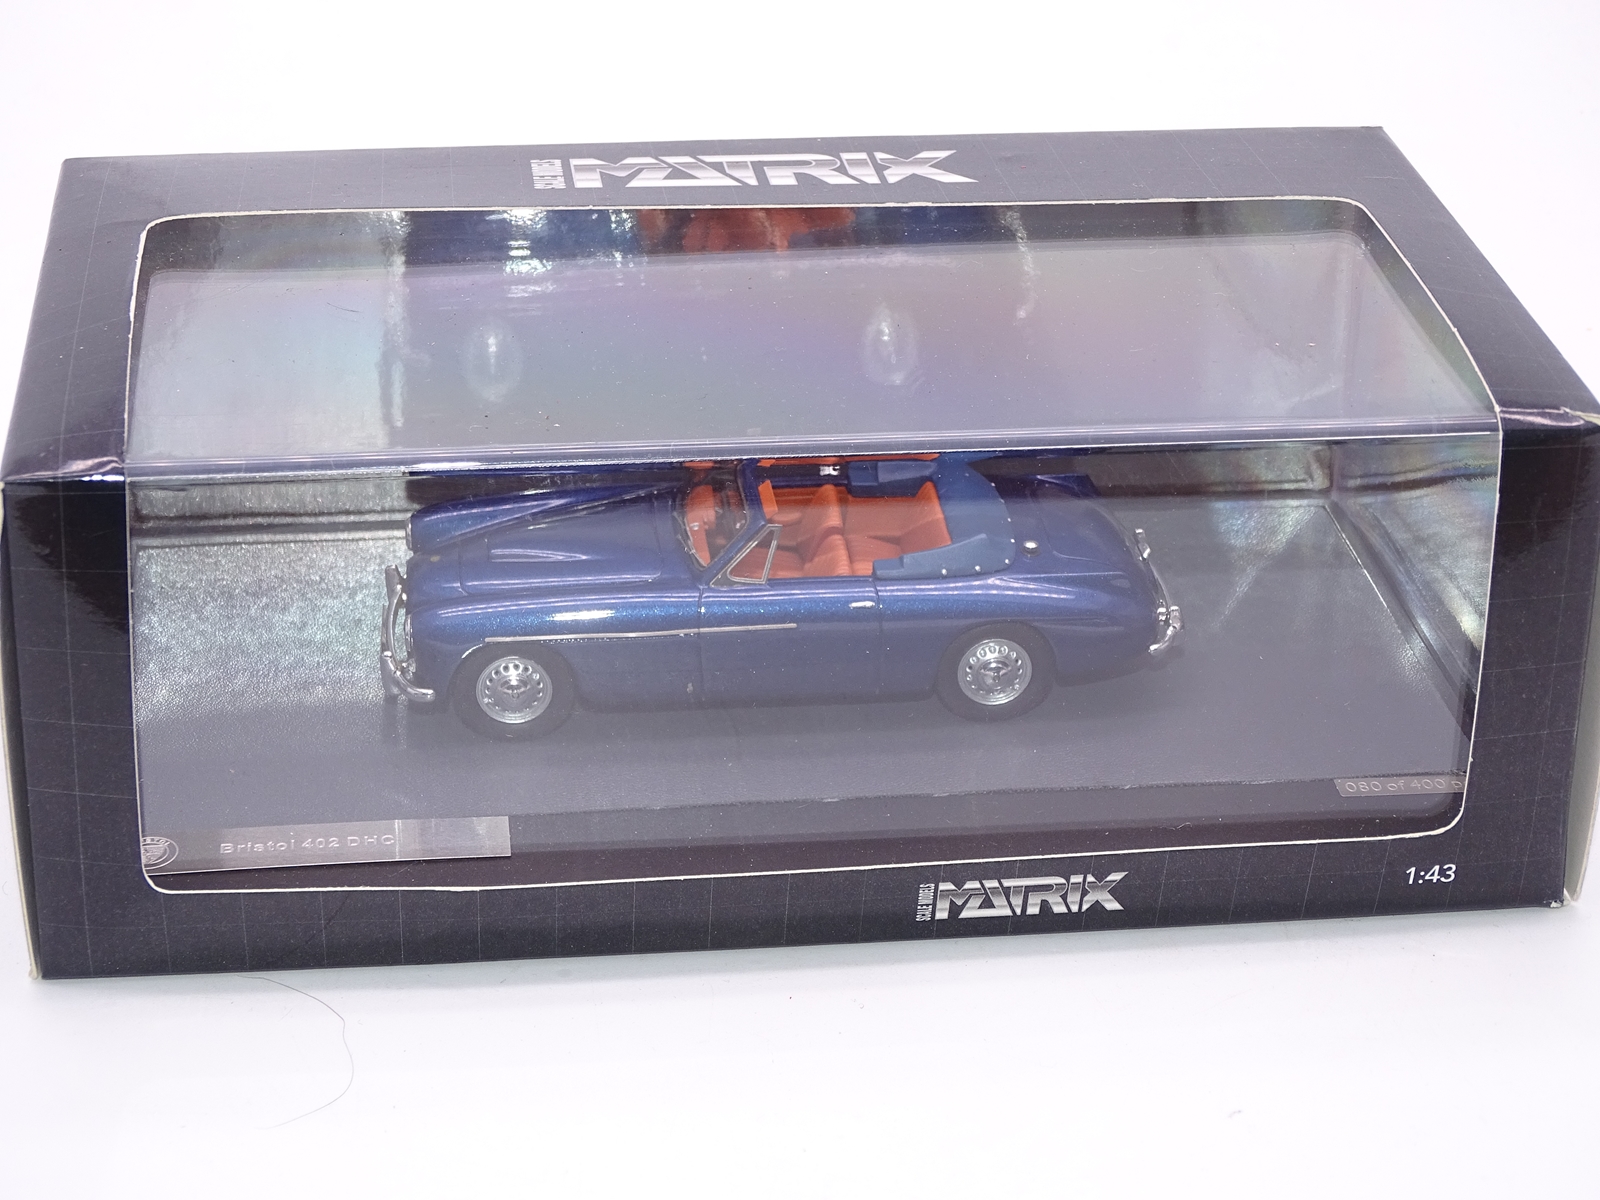 MATRIX HAND BUILT RESIN AND DIECAST 1:43 SCALE CAR